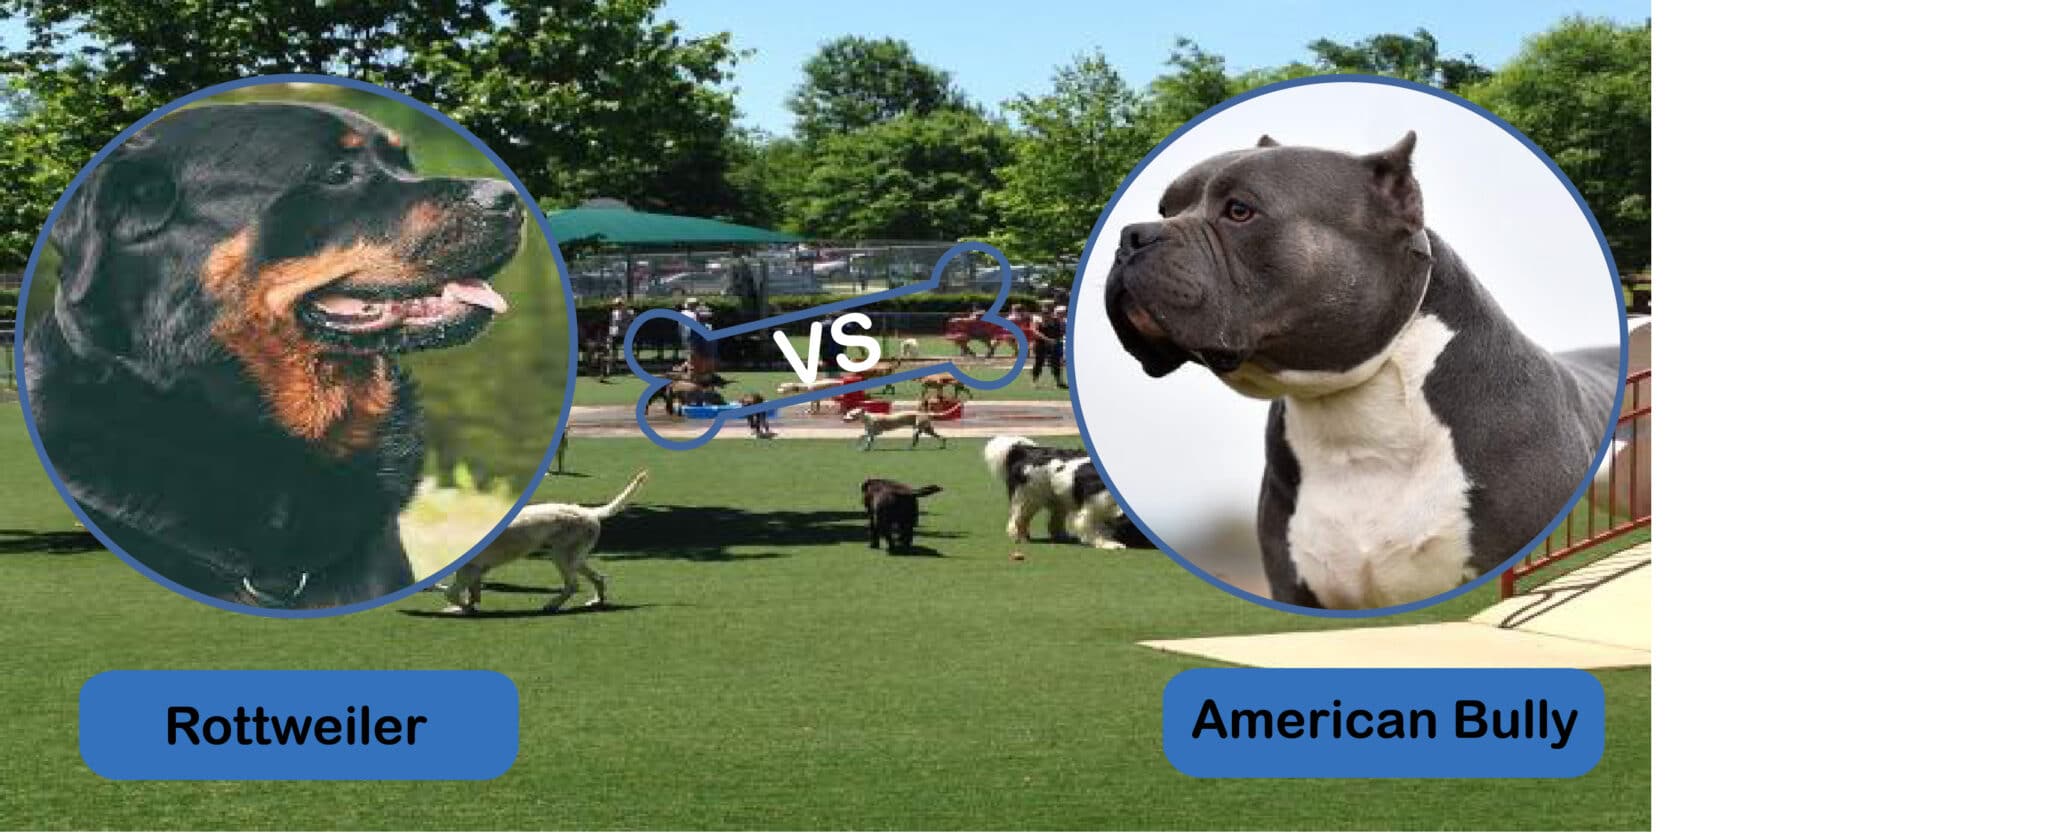 American Bully Vs. Rottweiler: Breed Guide - The American Bully